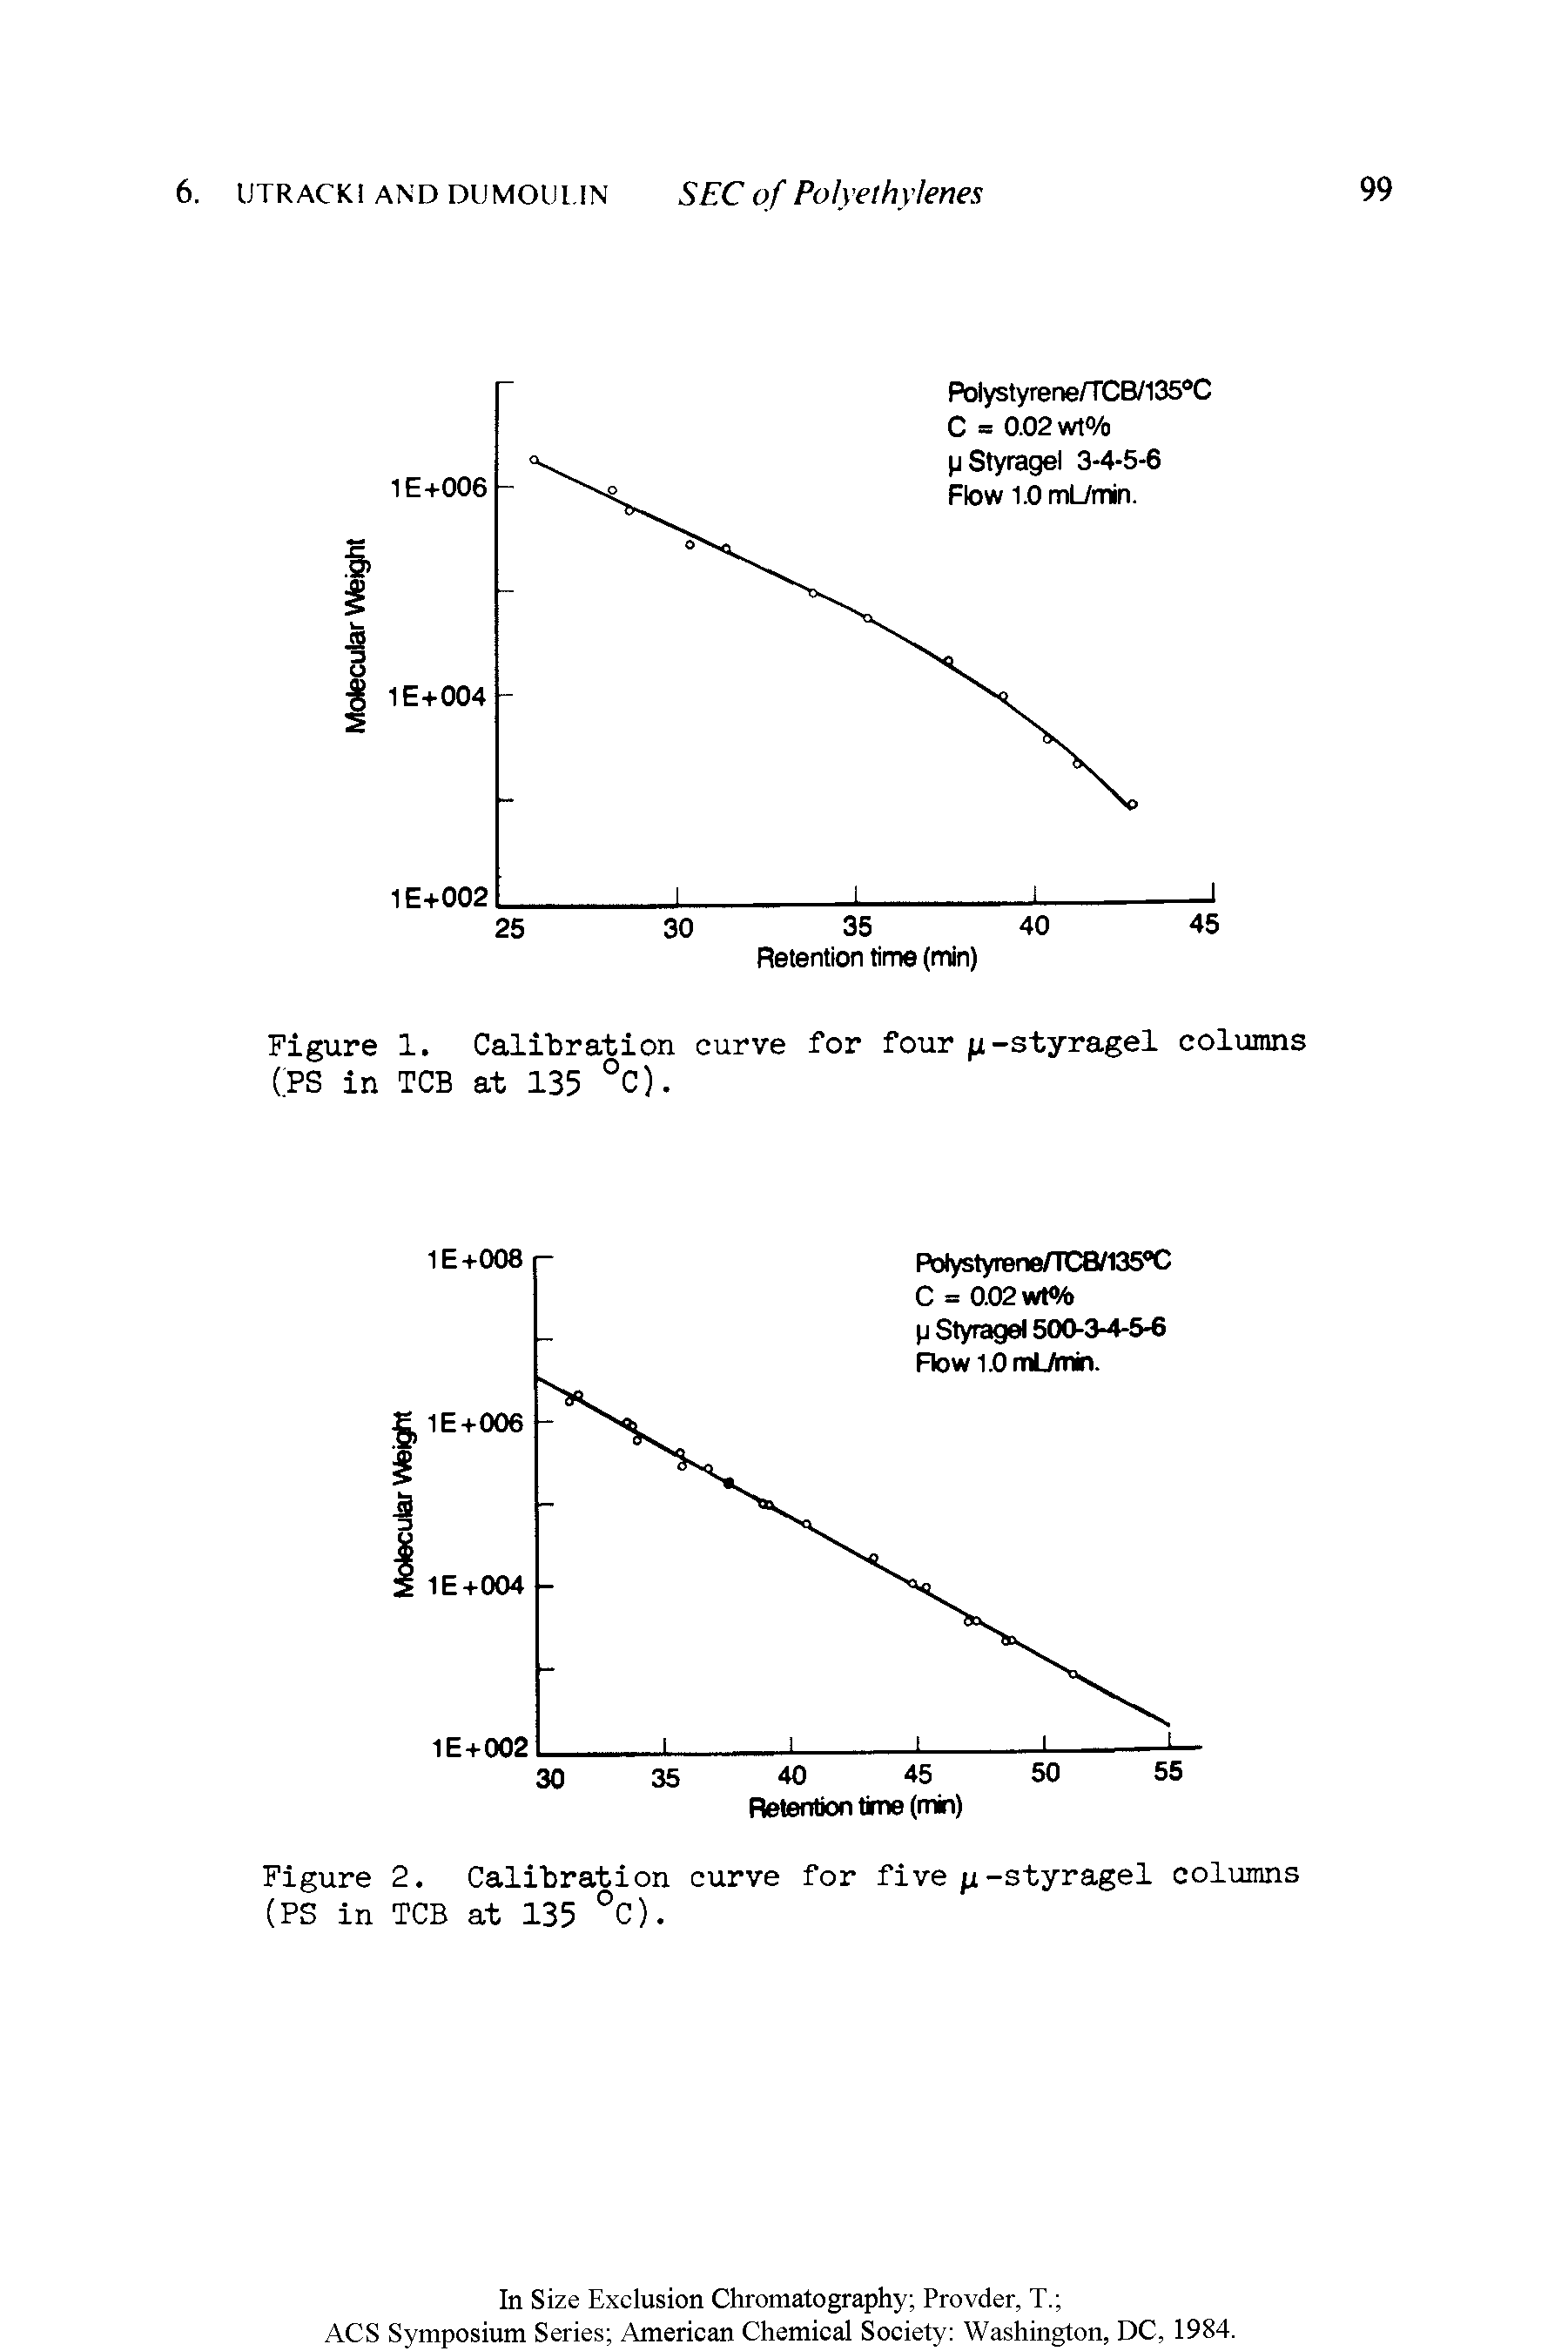 Figure 1. Calibration curve for four -styragel columns CPS in TCB at 135 °C).